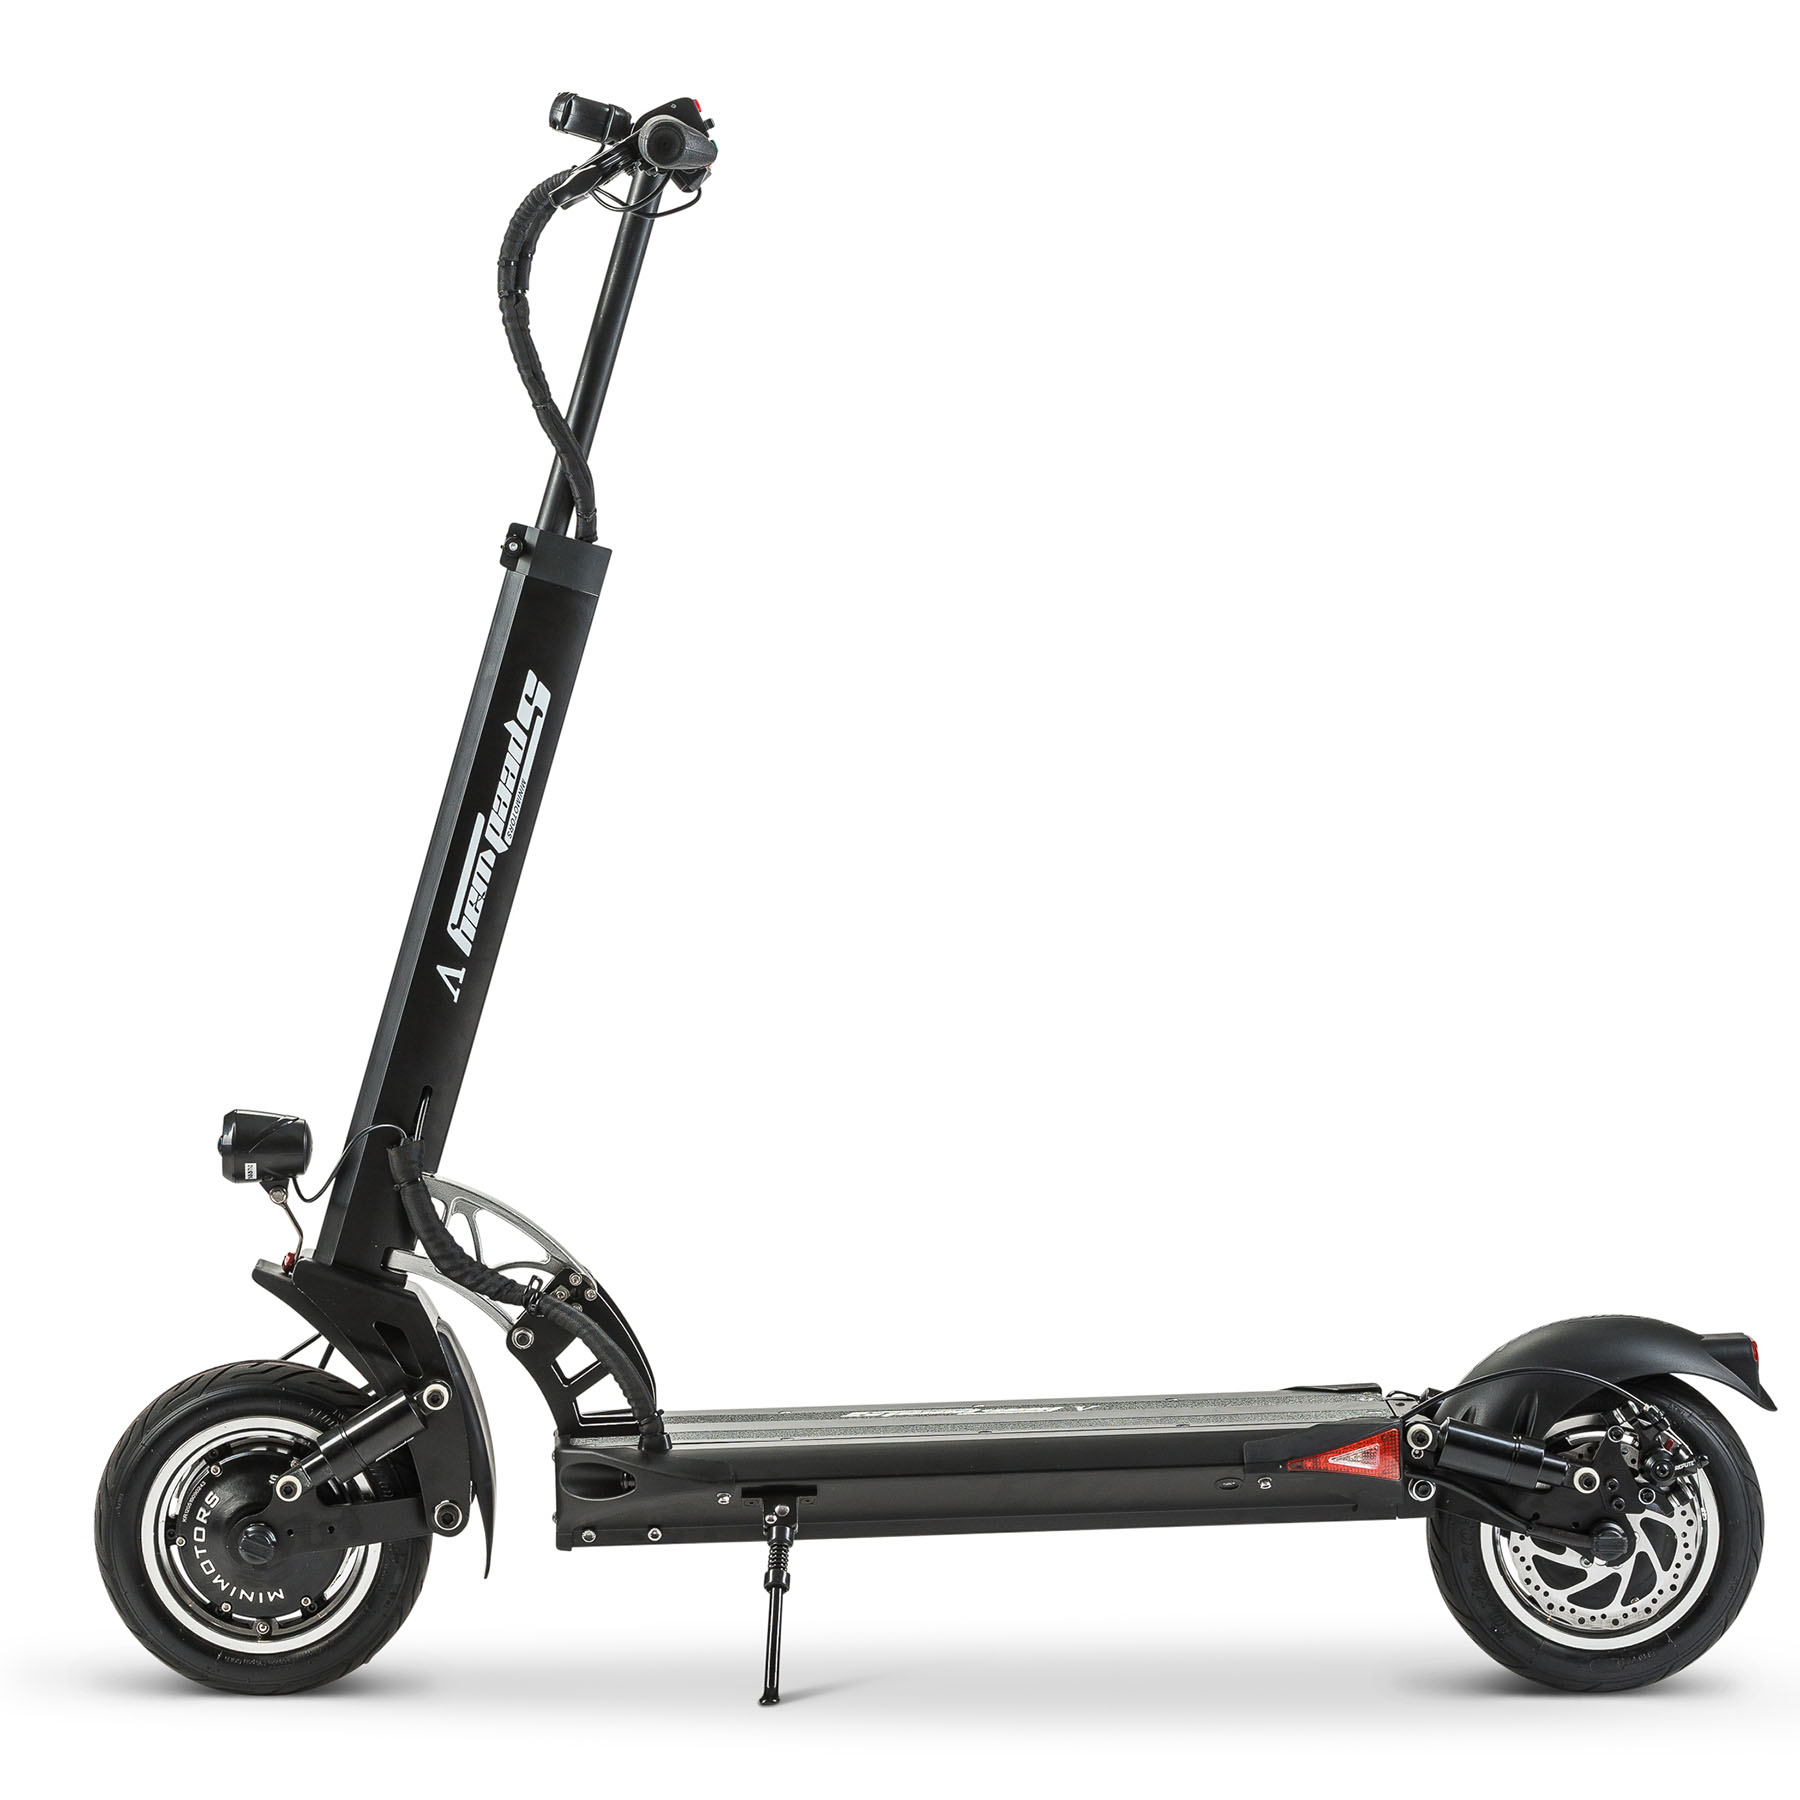 Speedway 5 The Speedway 5 is a electric scooter that packs a punch in price and stats and is foldable. The 1800Ww (or 3600W) motor makes it the perfect scooter for hilly roads or when you need some extra power. Both versions of the Speedway 5 can go up to 55 km/h when unlocked and have both suspension on the front and back. The magnetic (motorbrakes) and diskbrakes make sure you come to a complete stop in a matter of seconds.